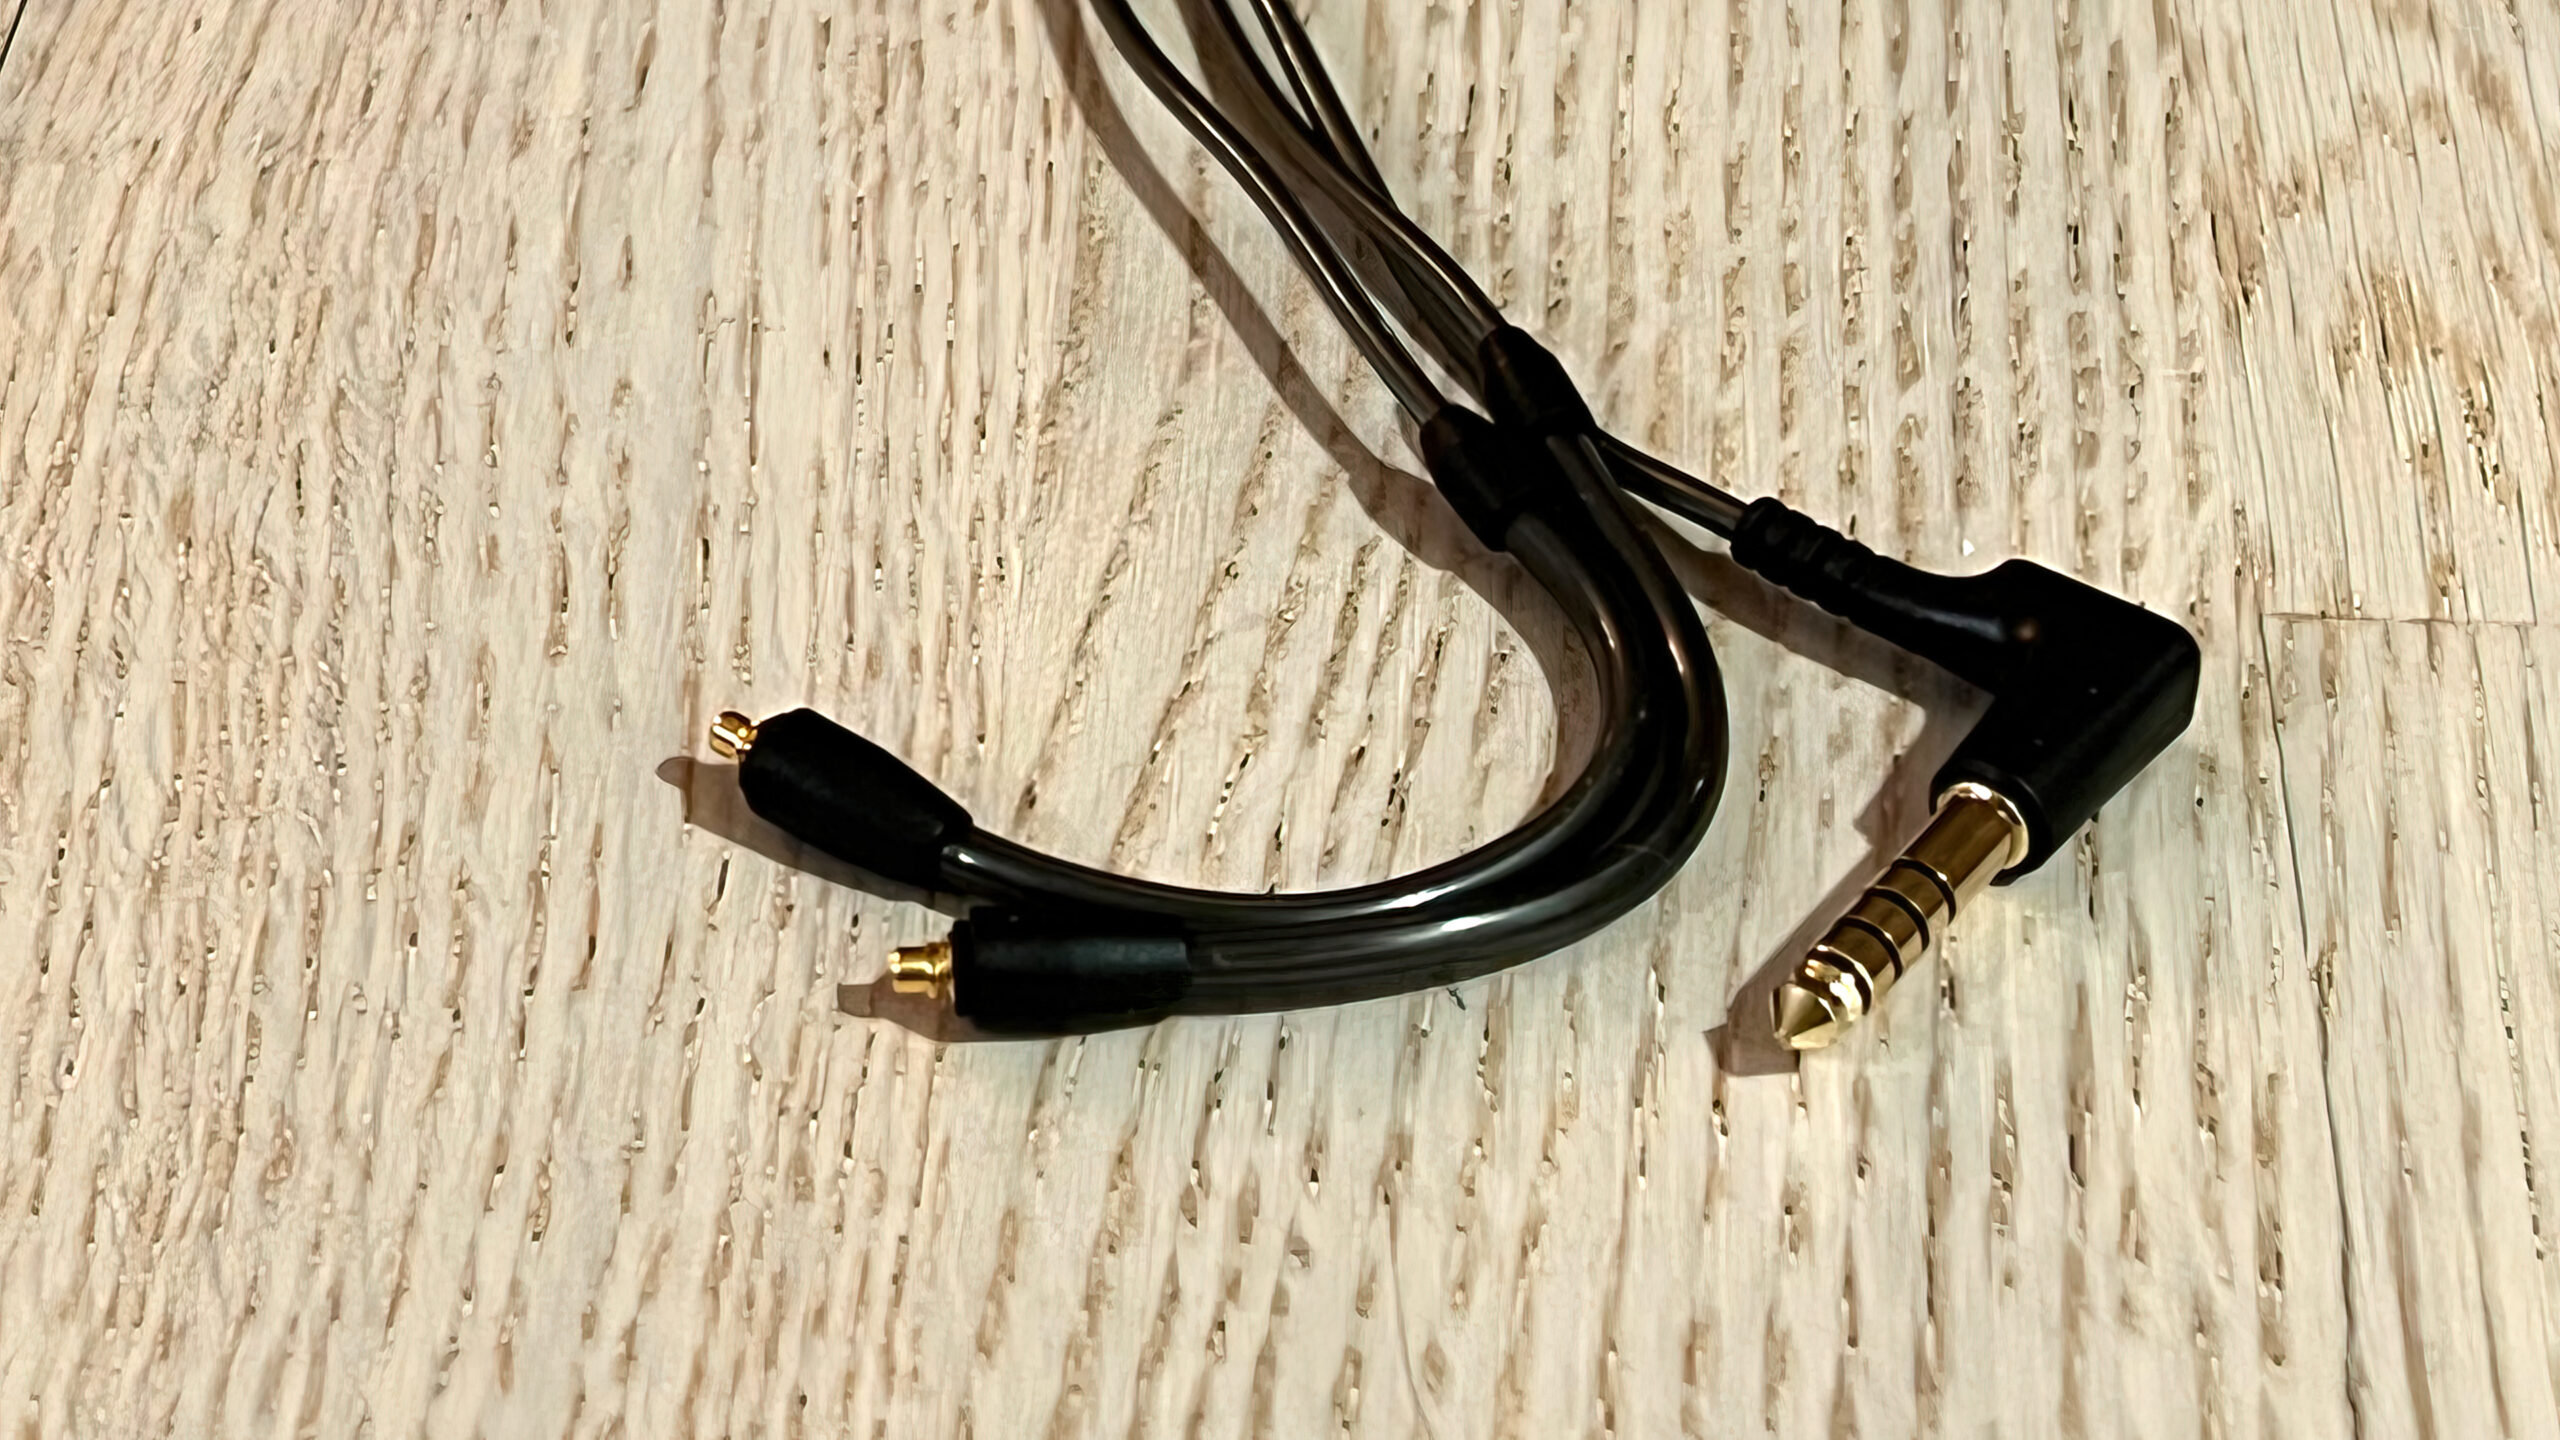 Sennheiser IE 600 4.4mm cable scaled 1 scaled 1